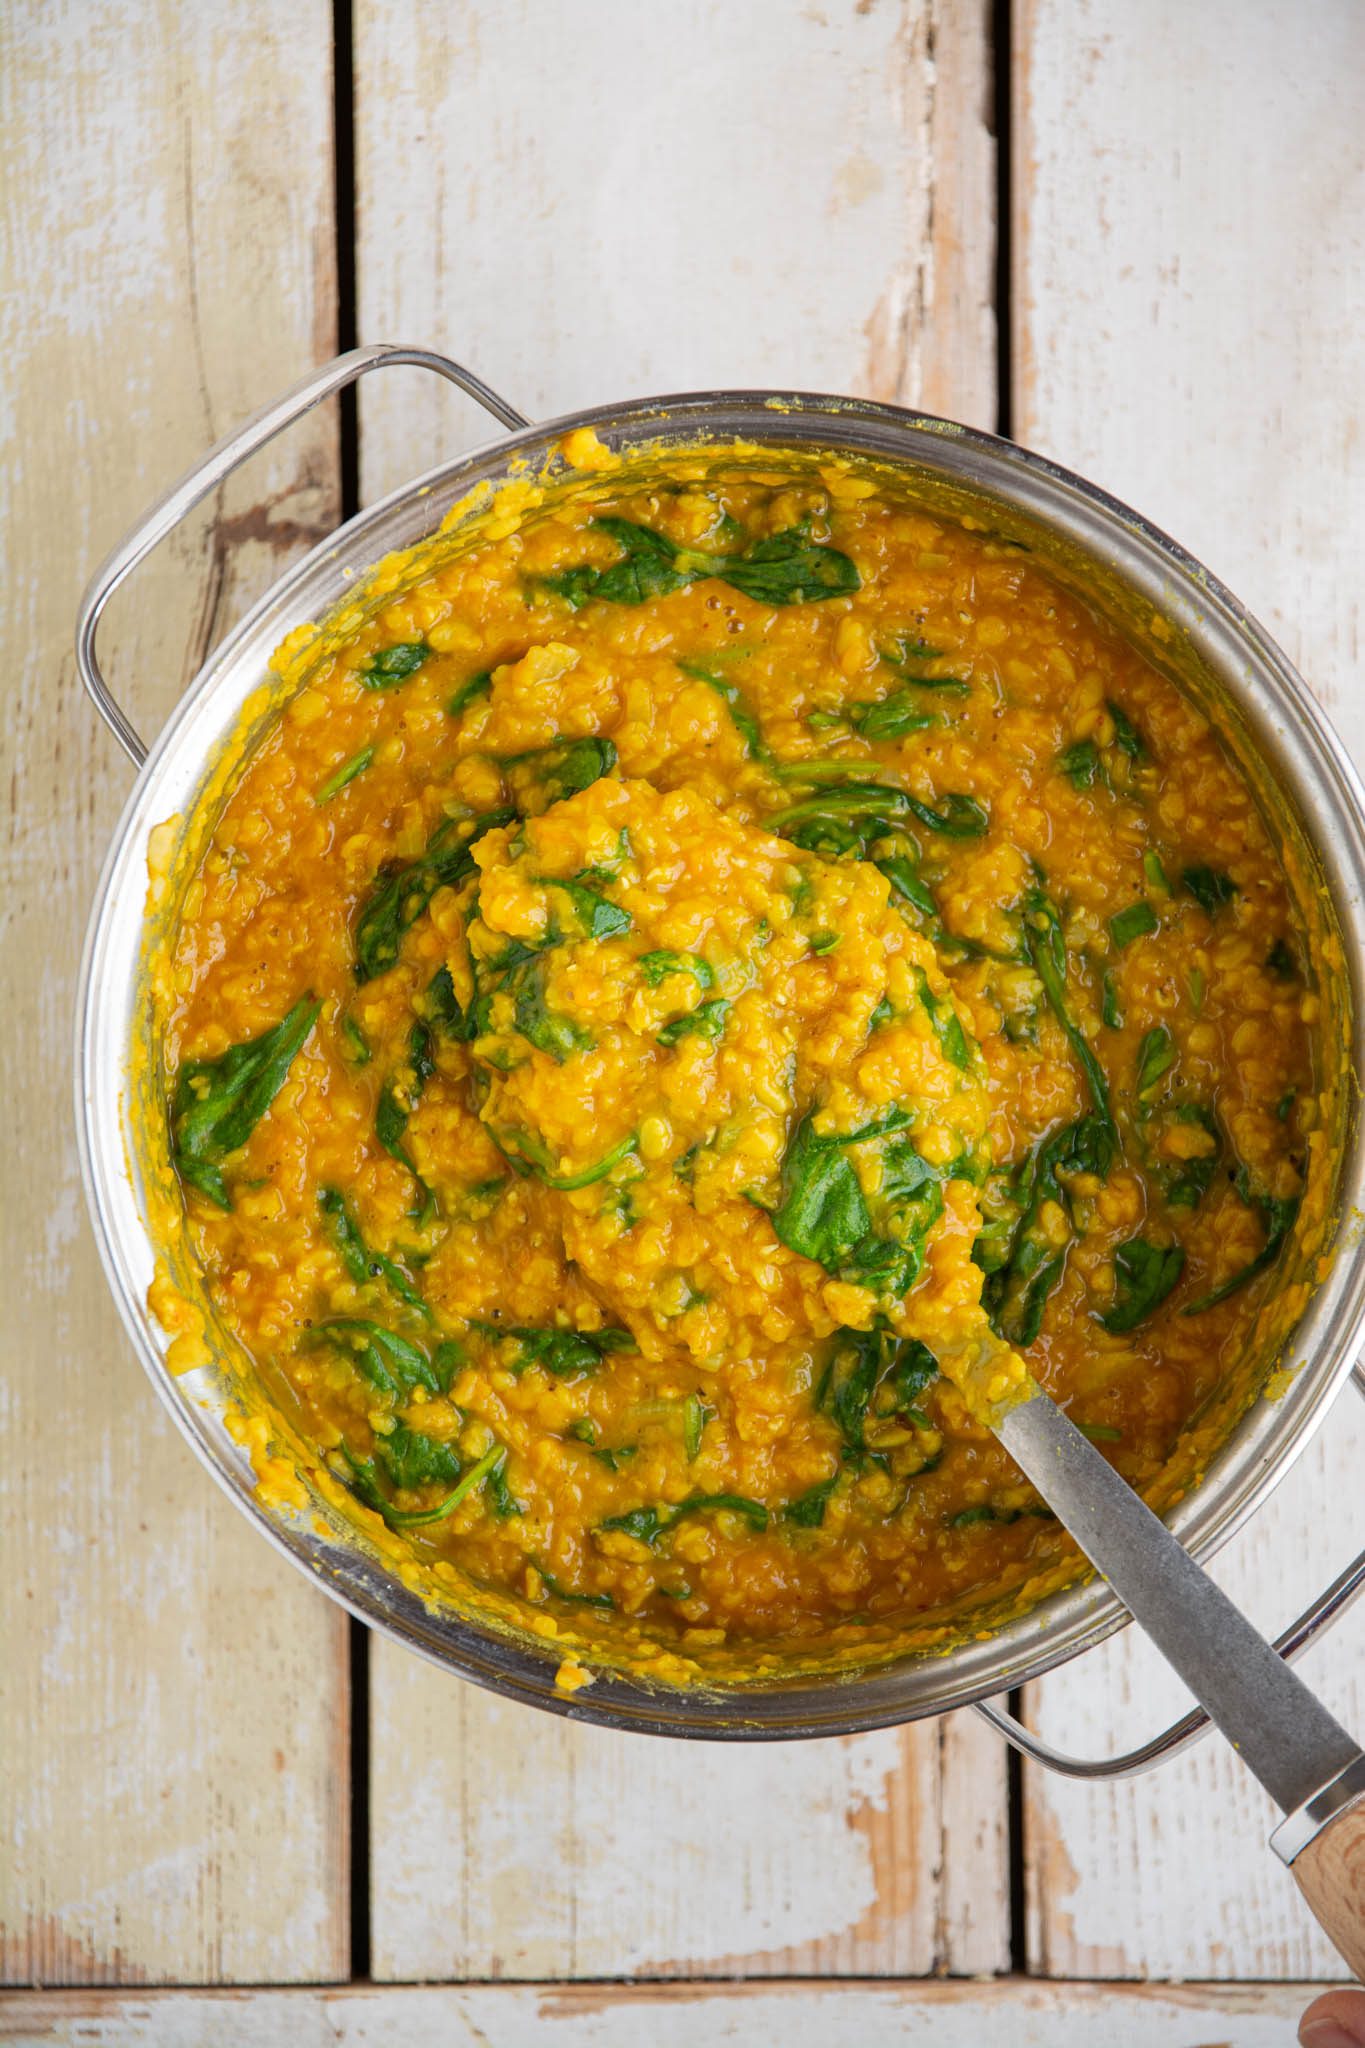 Learn how to make an easy red lentil and moong dal recipe with pumpkin and spinach. You’ll need simple plant-based ingredients and 30 minutes of your time.